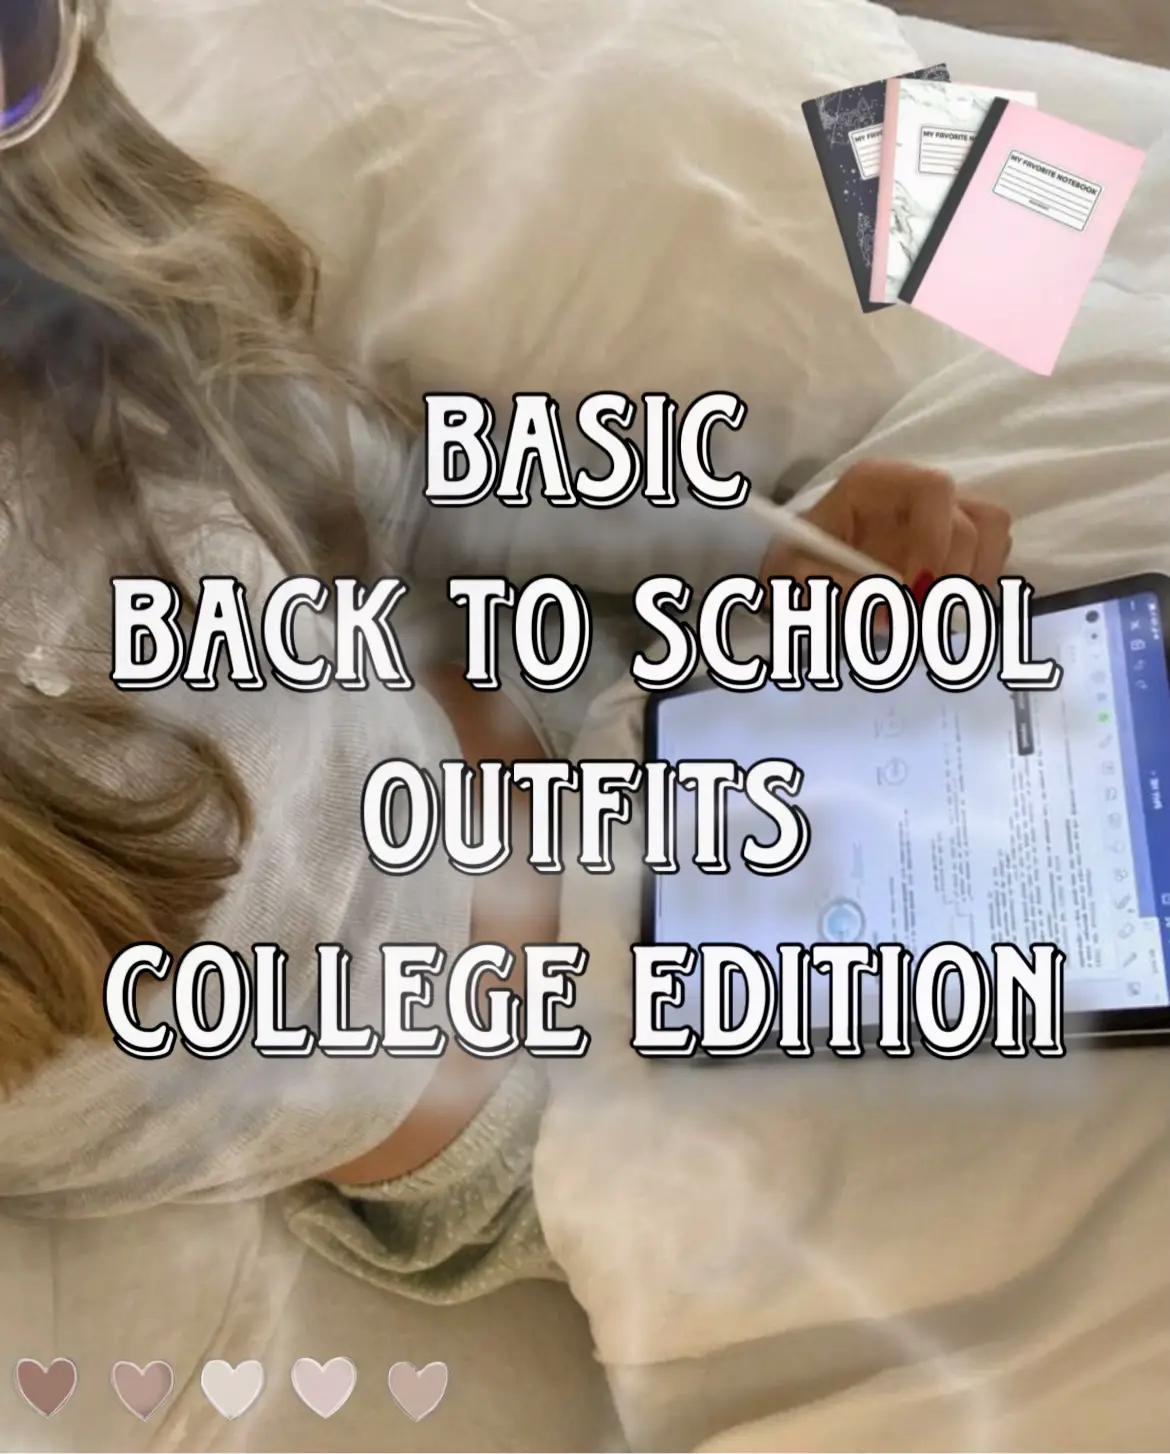 10 Preppy Outfits That Are Even Cooler Outside the Classroom